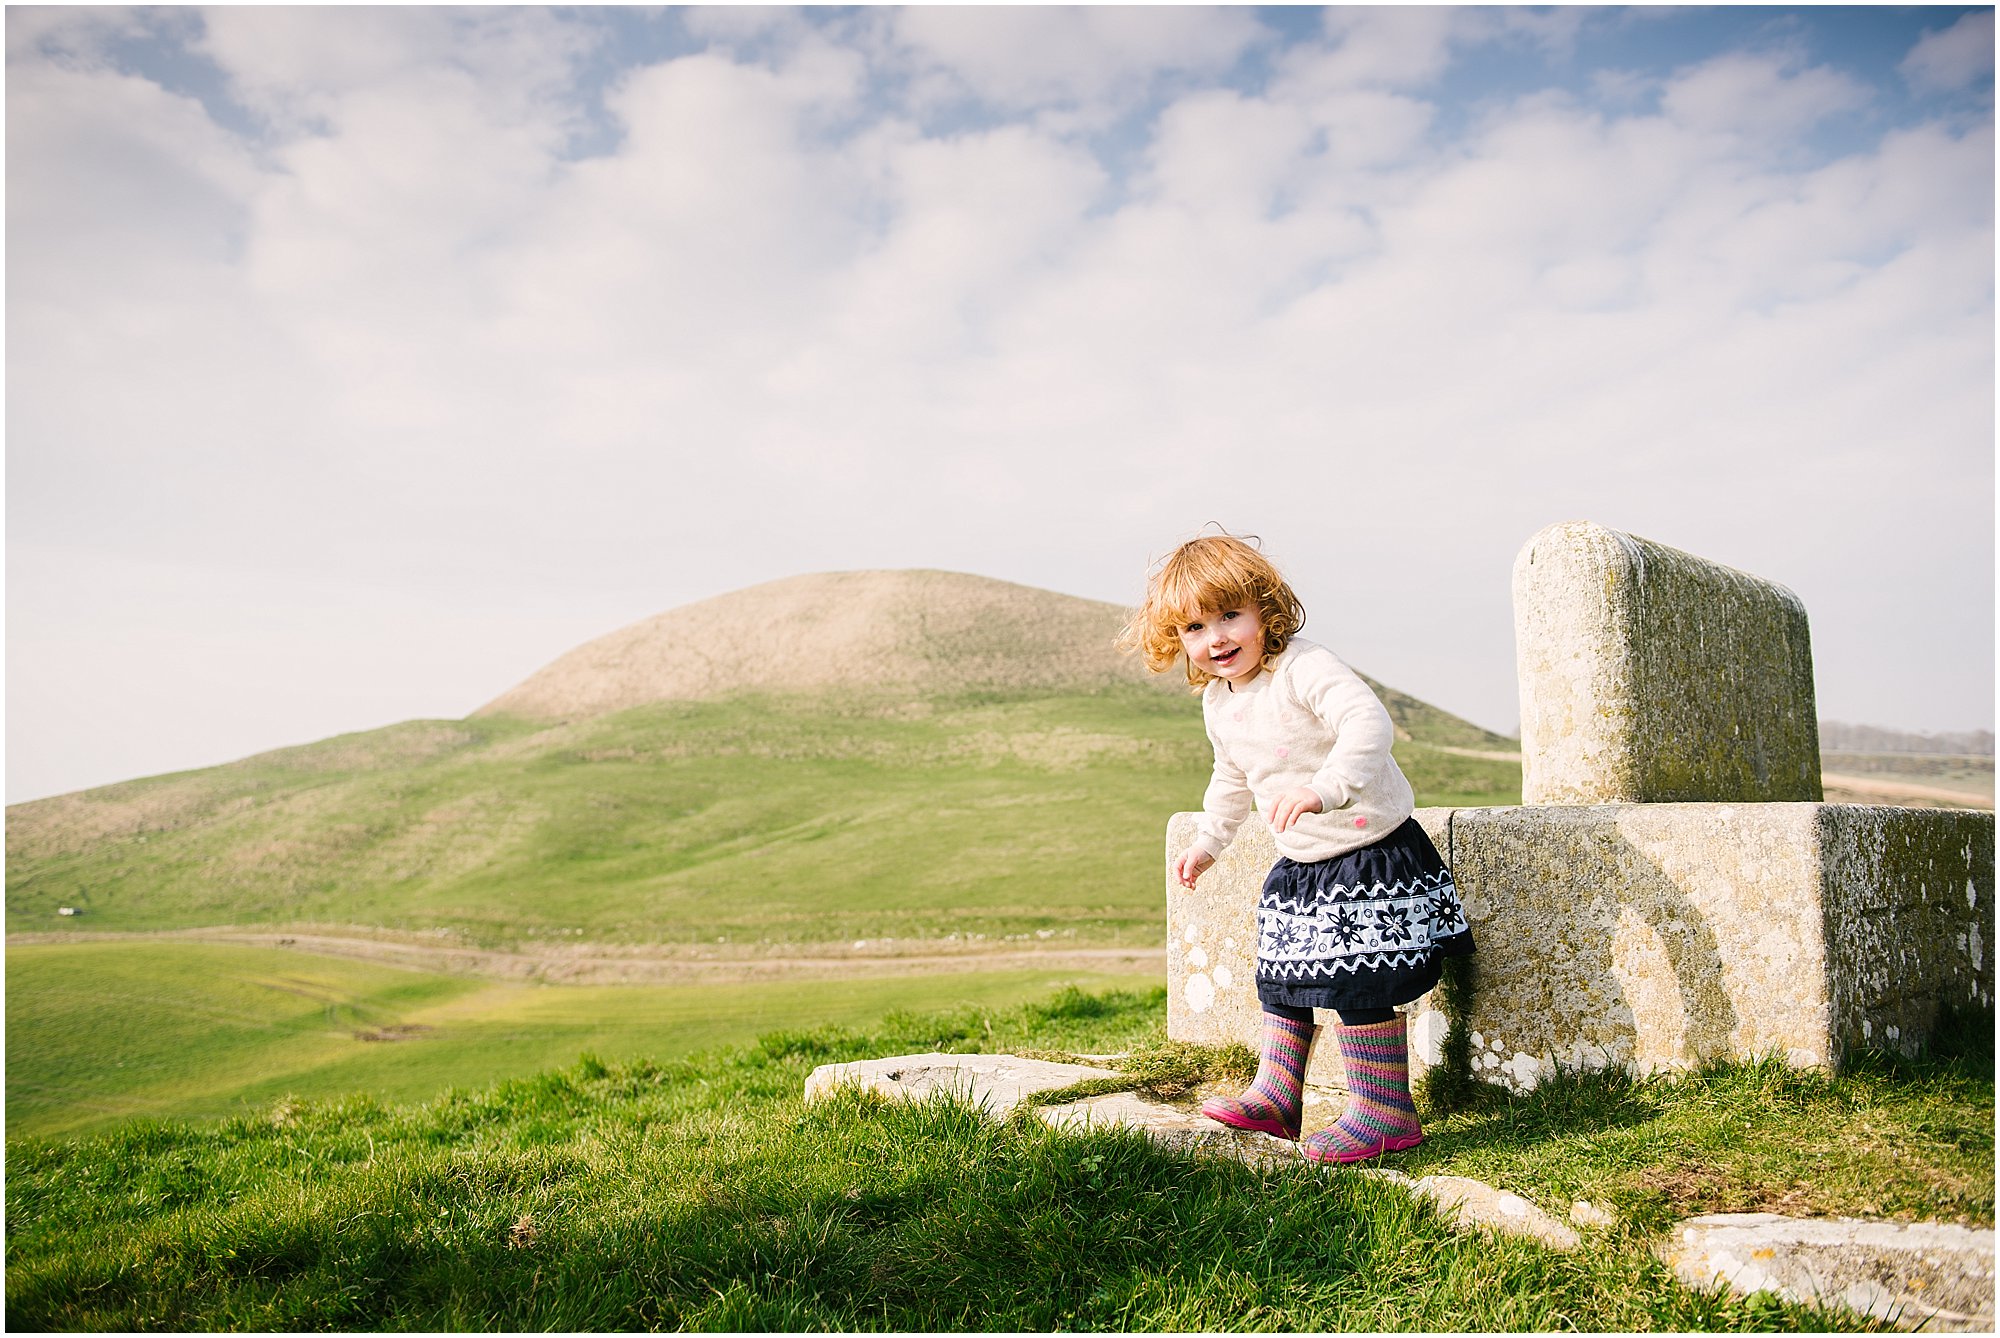 Family portraits in Dorset, by South wales photographers.